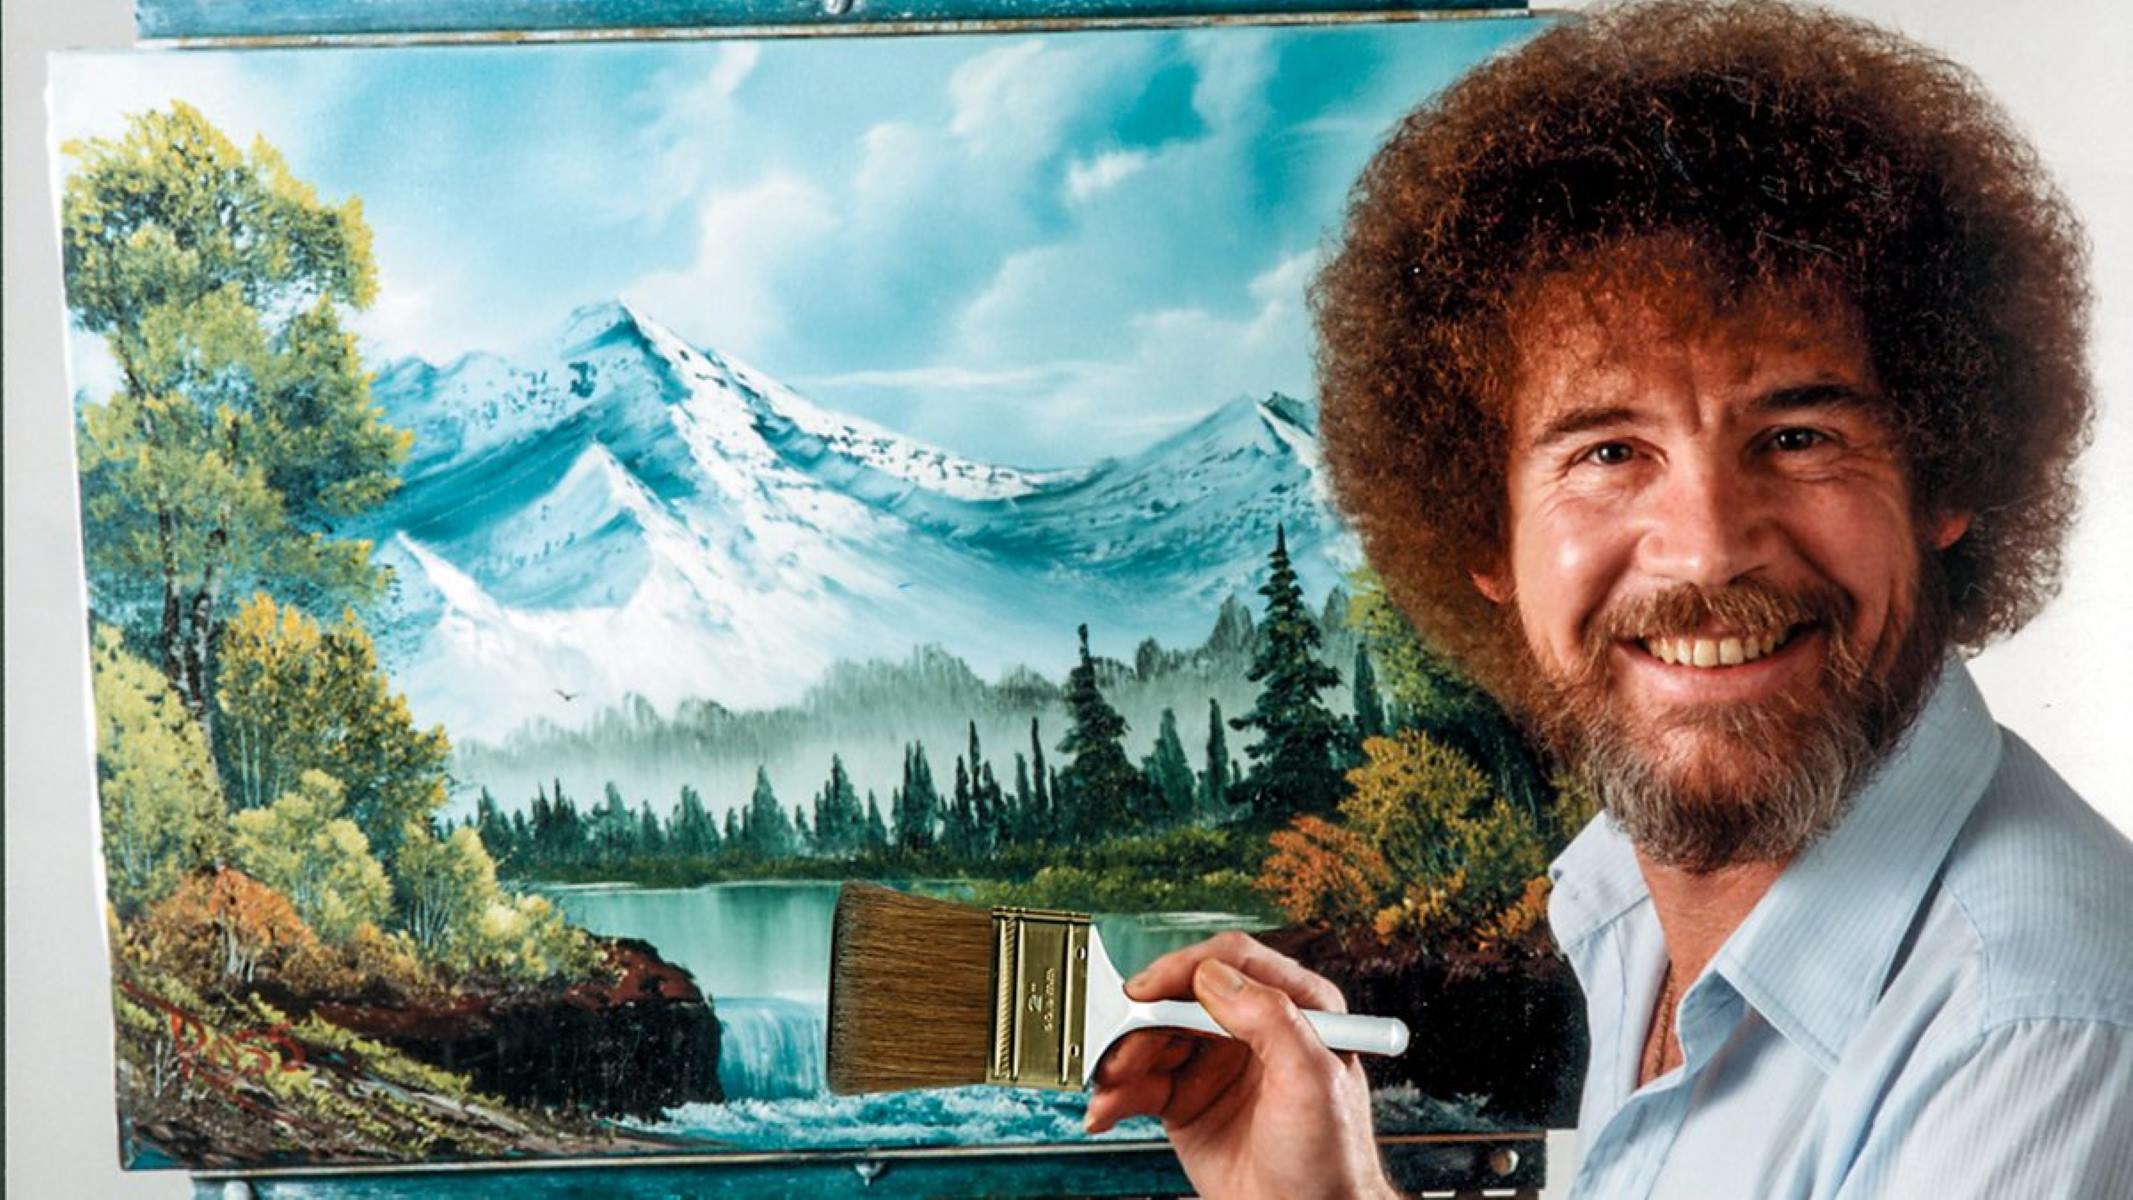 Bob Ross’ Iconic Artwork From ‘The Joy Of Painting’ Show Goes On Sale For $9.8 Million